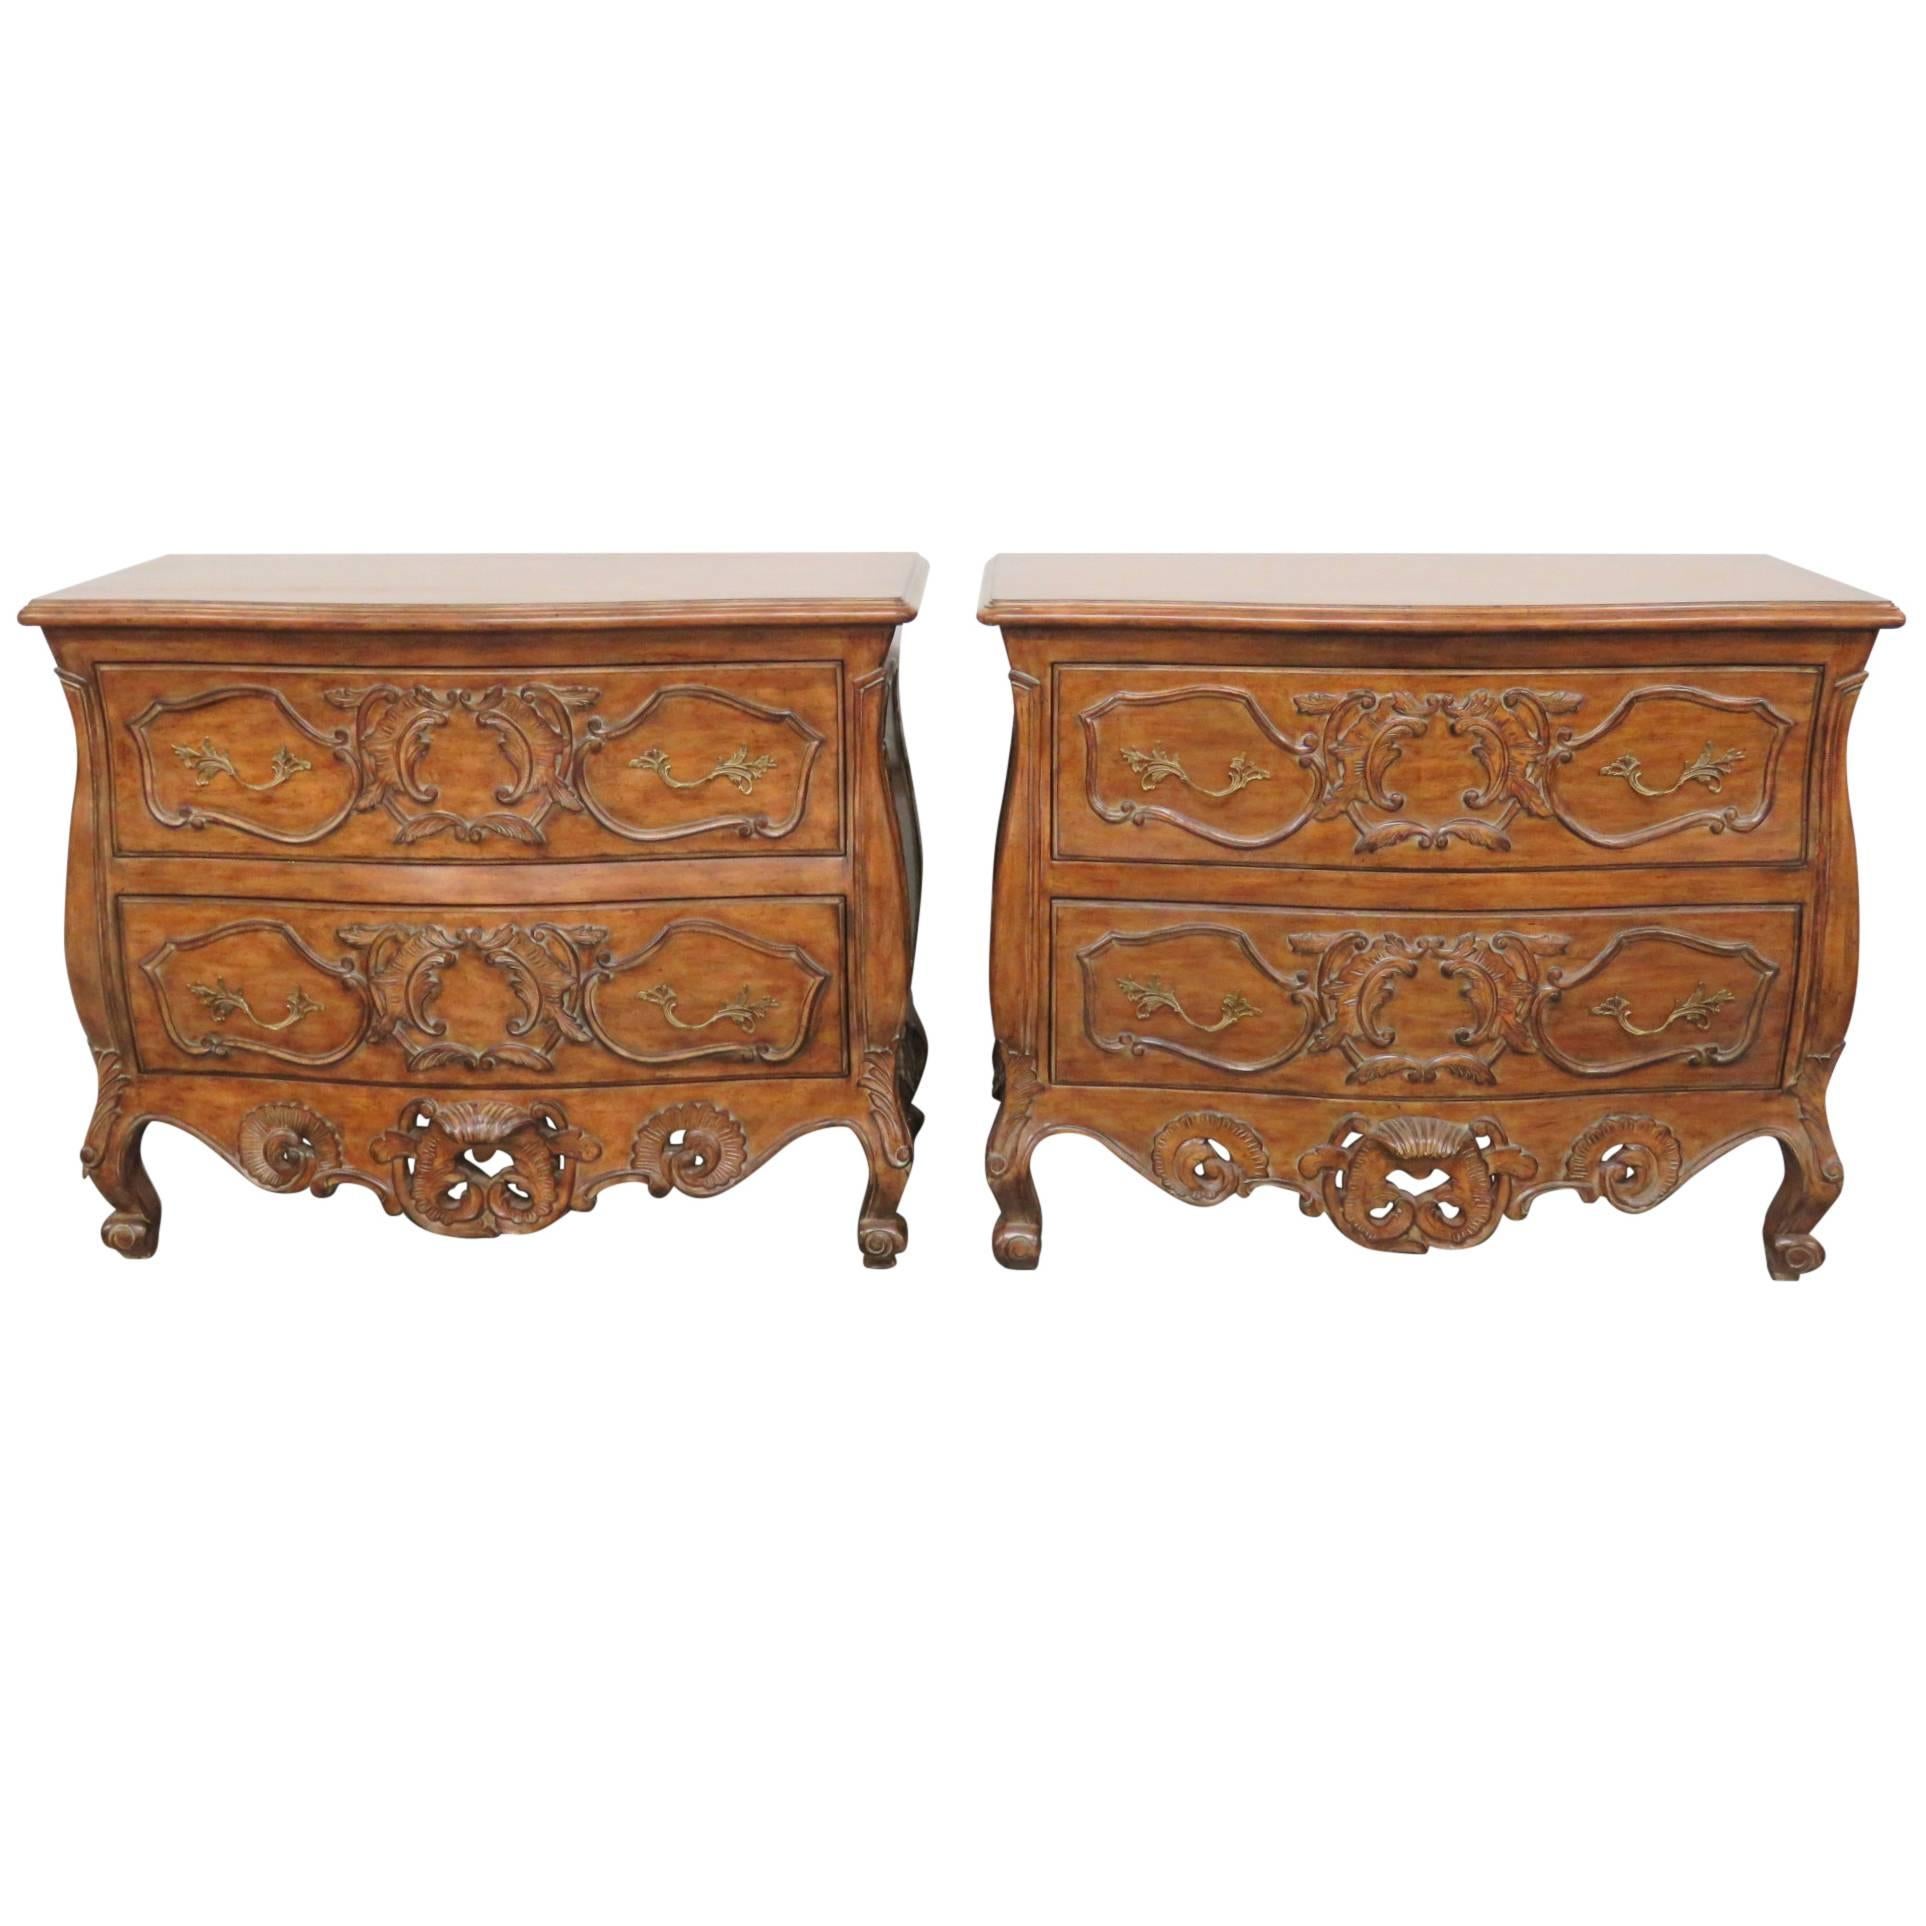 Pair of French Style Carved Commodes